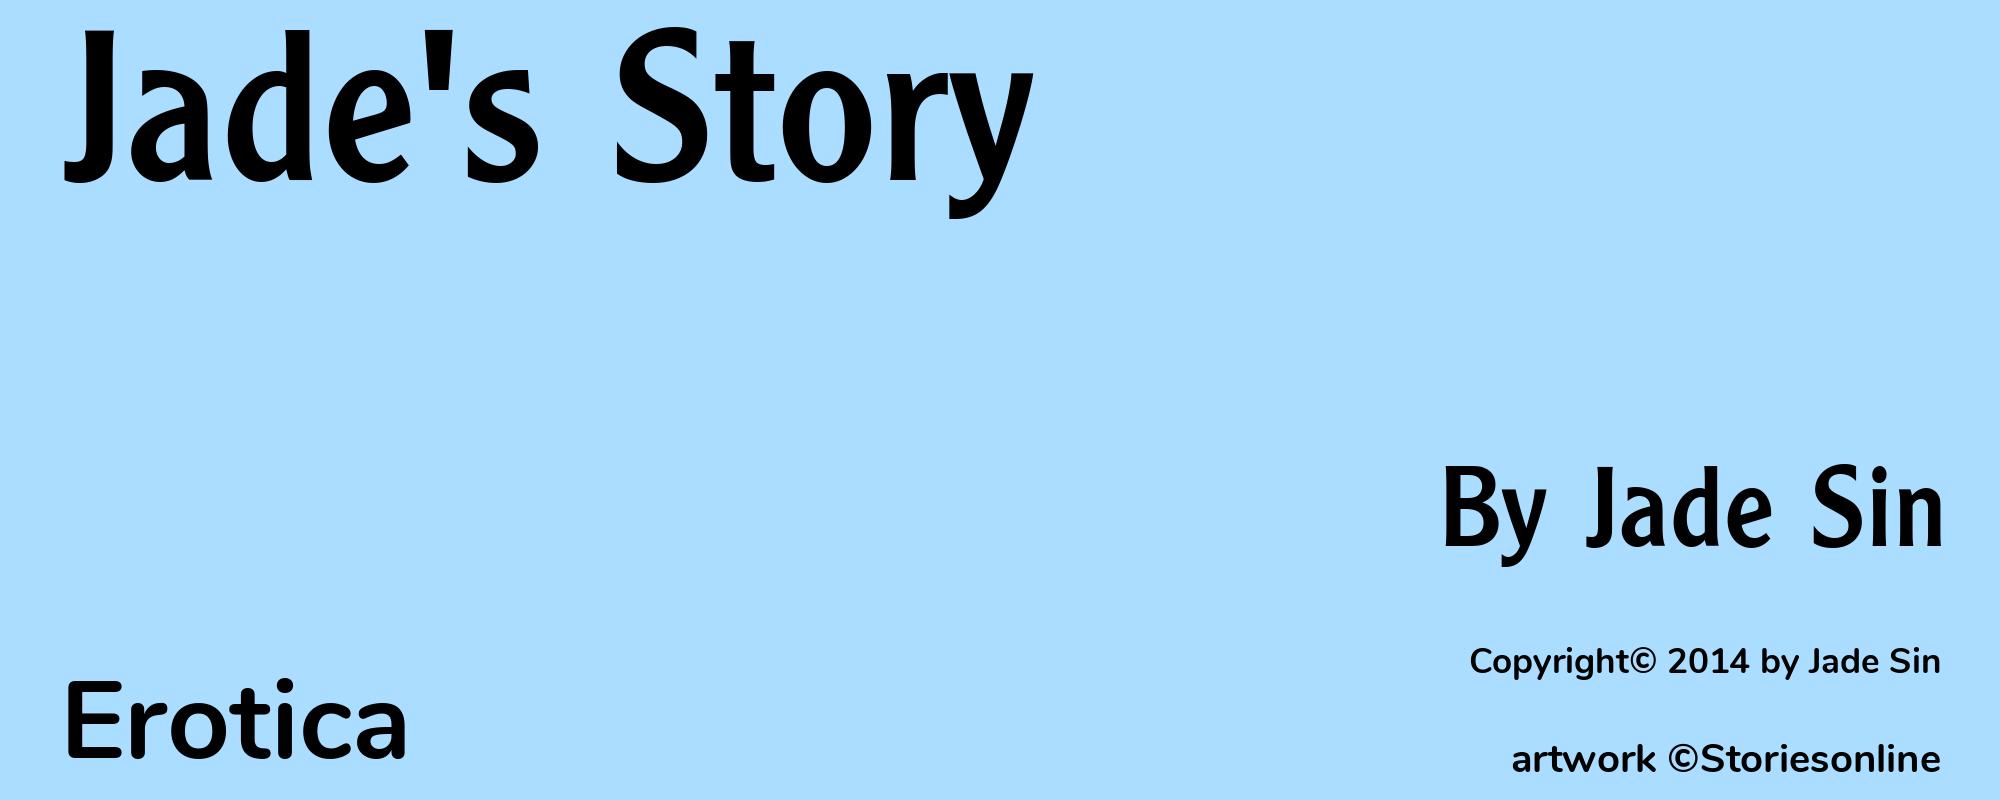 Jade's Story - Cover